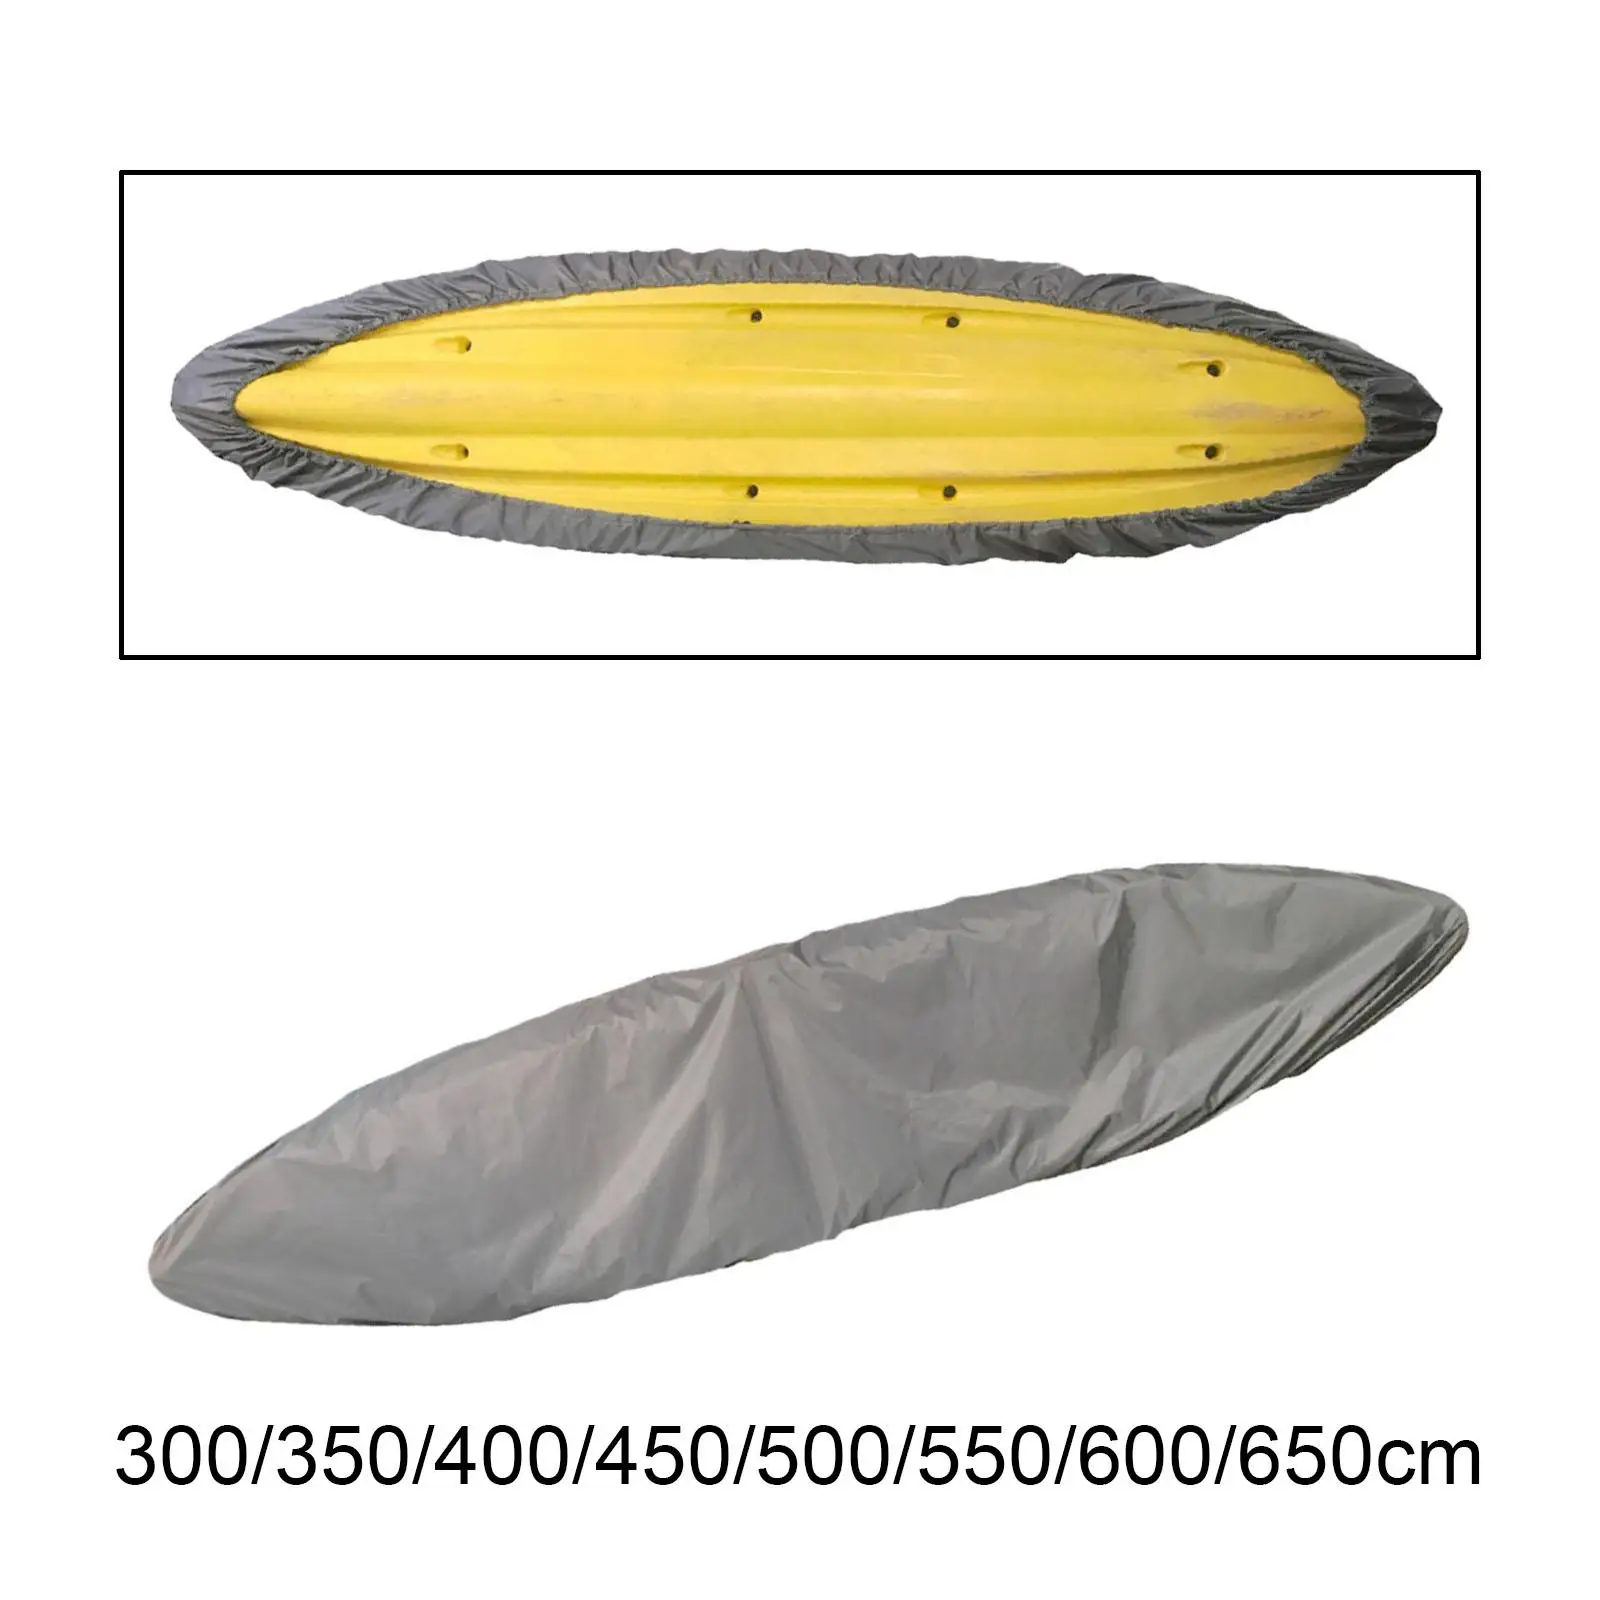 Boat Dust Cover Transport Protector Fishing Boat Cover Canoe Cover Waterproof Kayak Cover for Kayaking Surfing Canoeing Boating